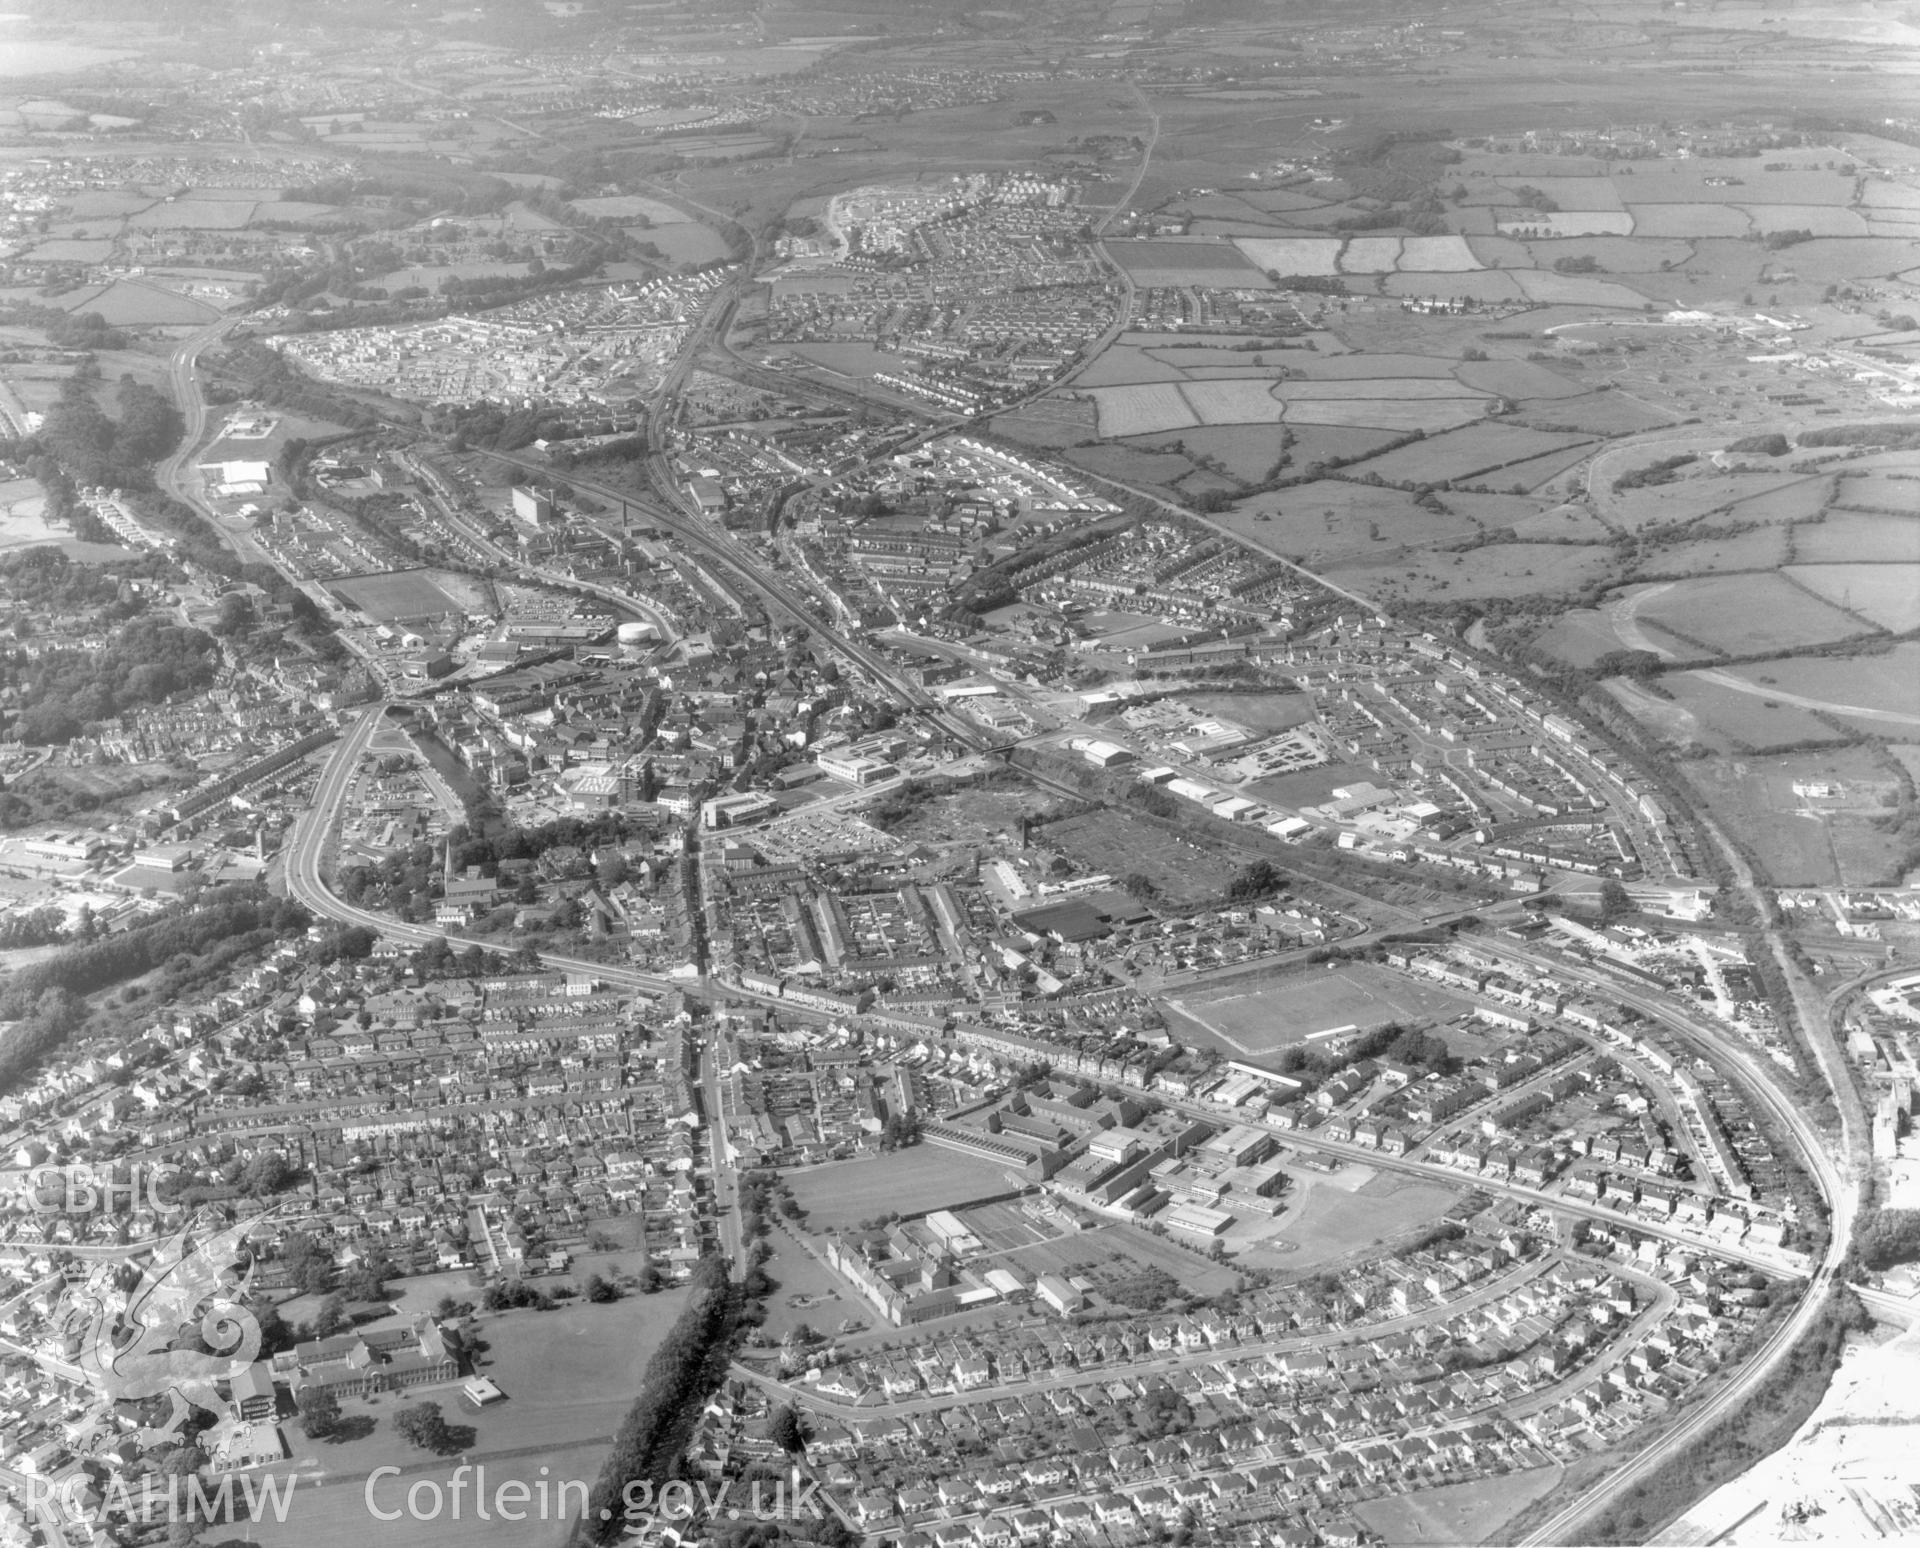 1 b/w print showing aerial view of Bridgend; collated by the former Central Office of Information.